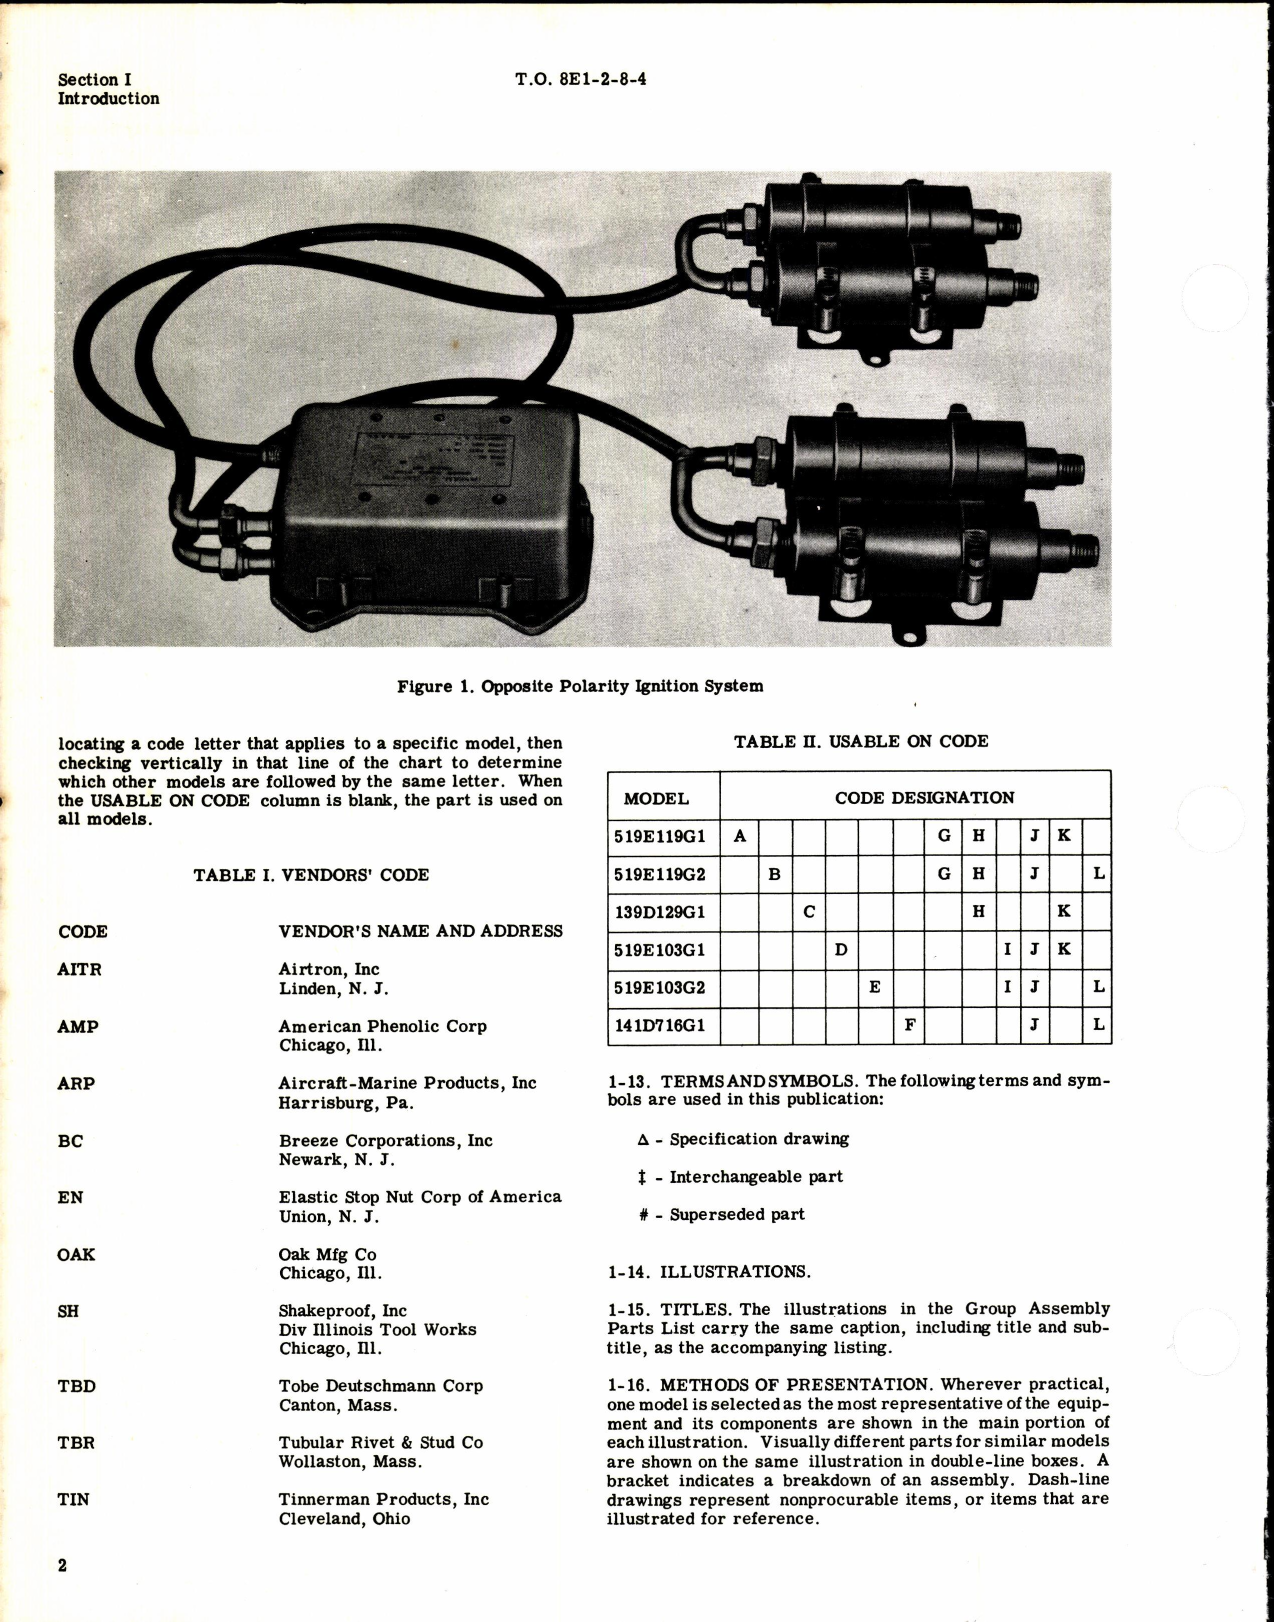 Sample page 2 from AirCorps Library document: Parts Breakdown for Opposite Polarity Ignition System